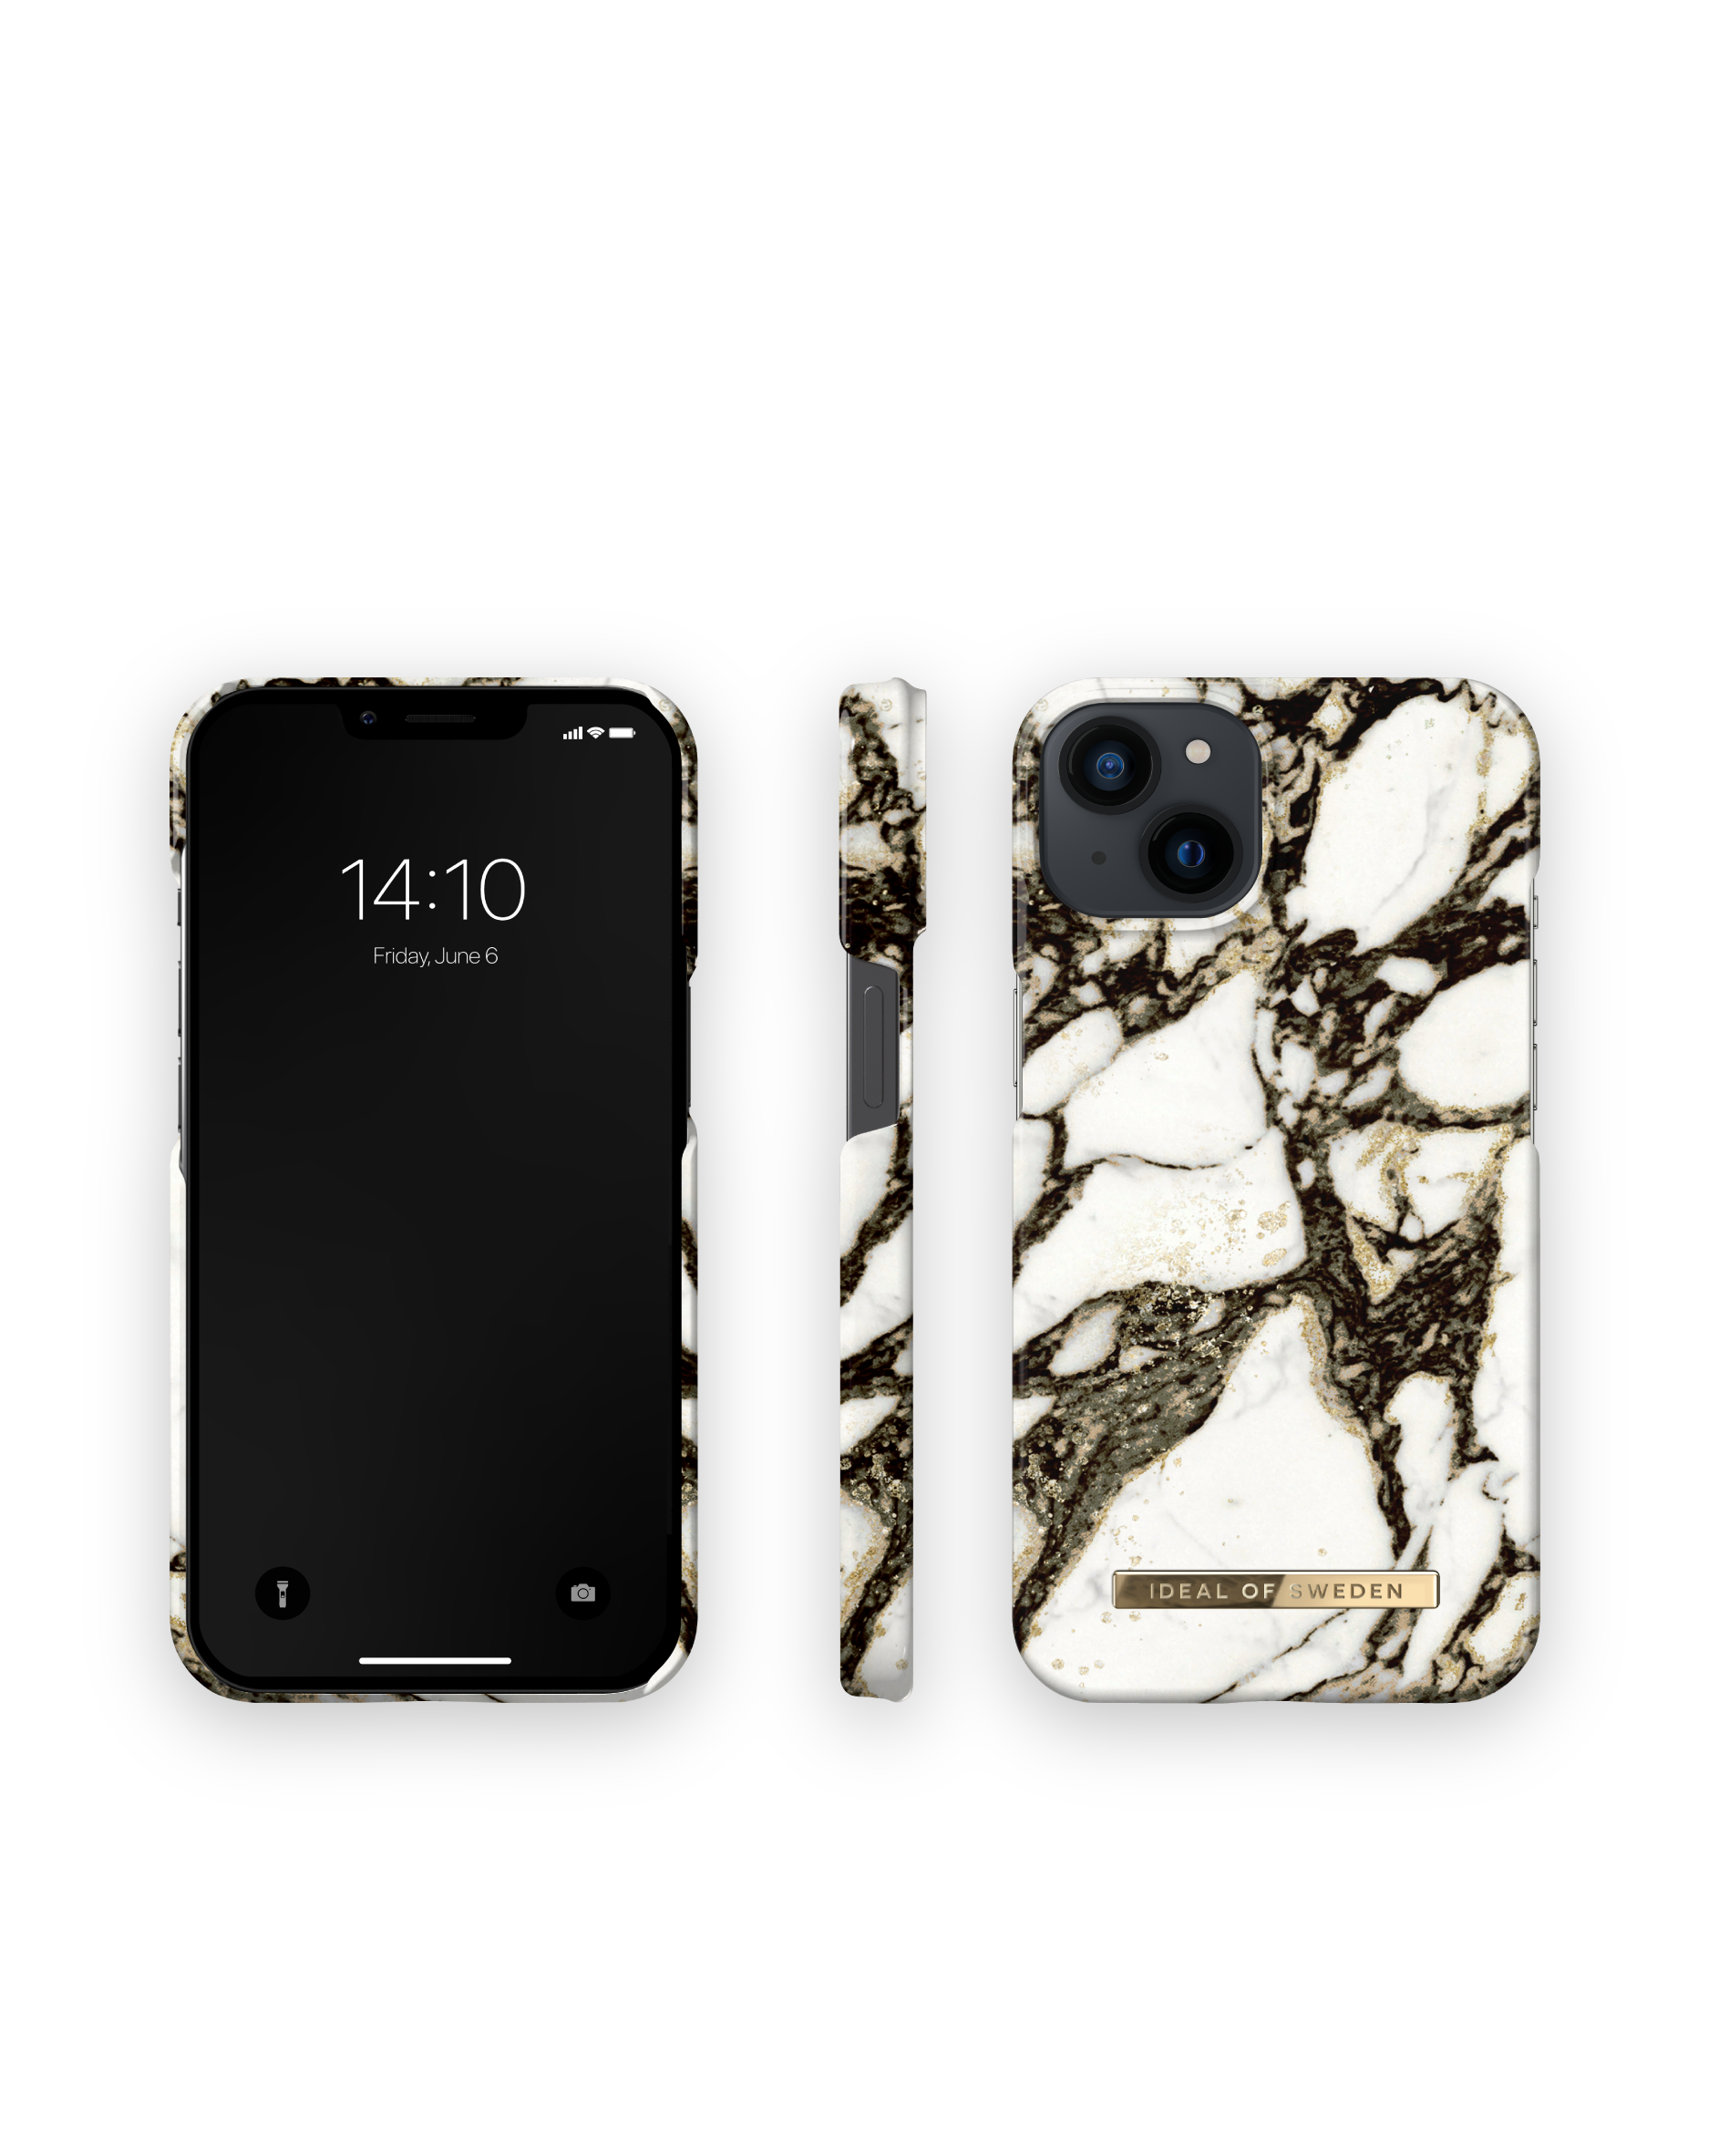 OF IDEAL SWEDEN 13, Golden Apple, iPhone Marble Backcover, Calacatta IDFCMR21-I2161-380,